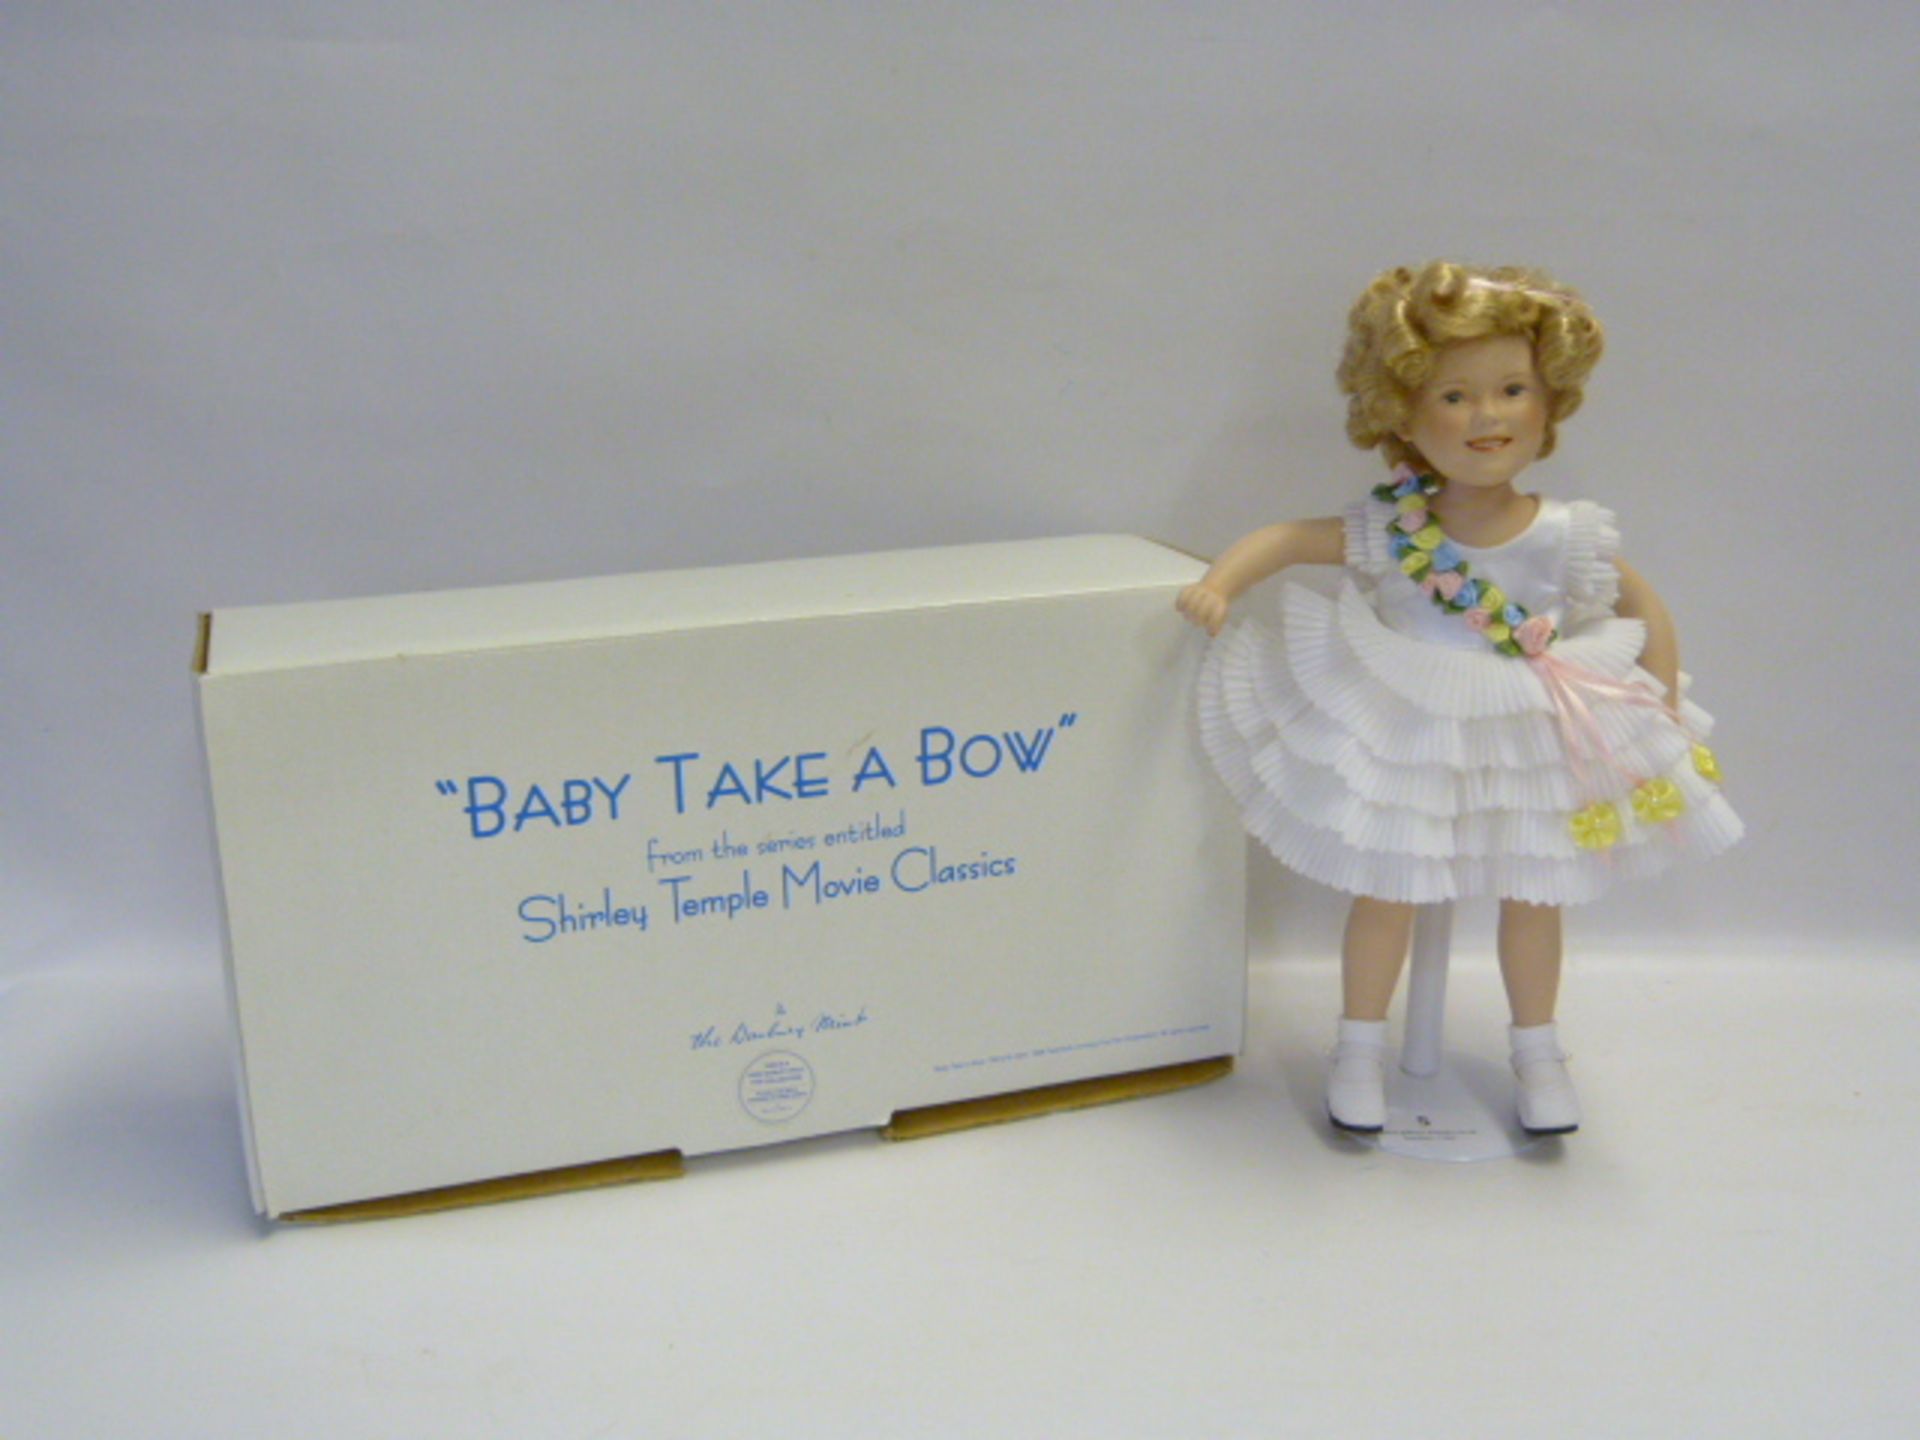 Shirley Temple Danbury Mint Doll "Baby Take a Bow"